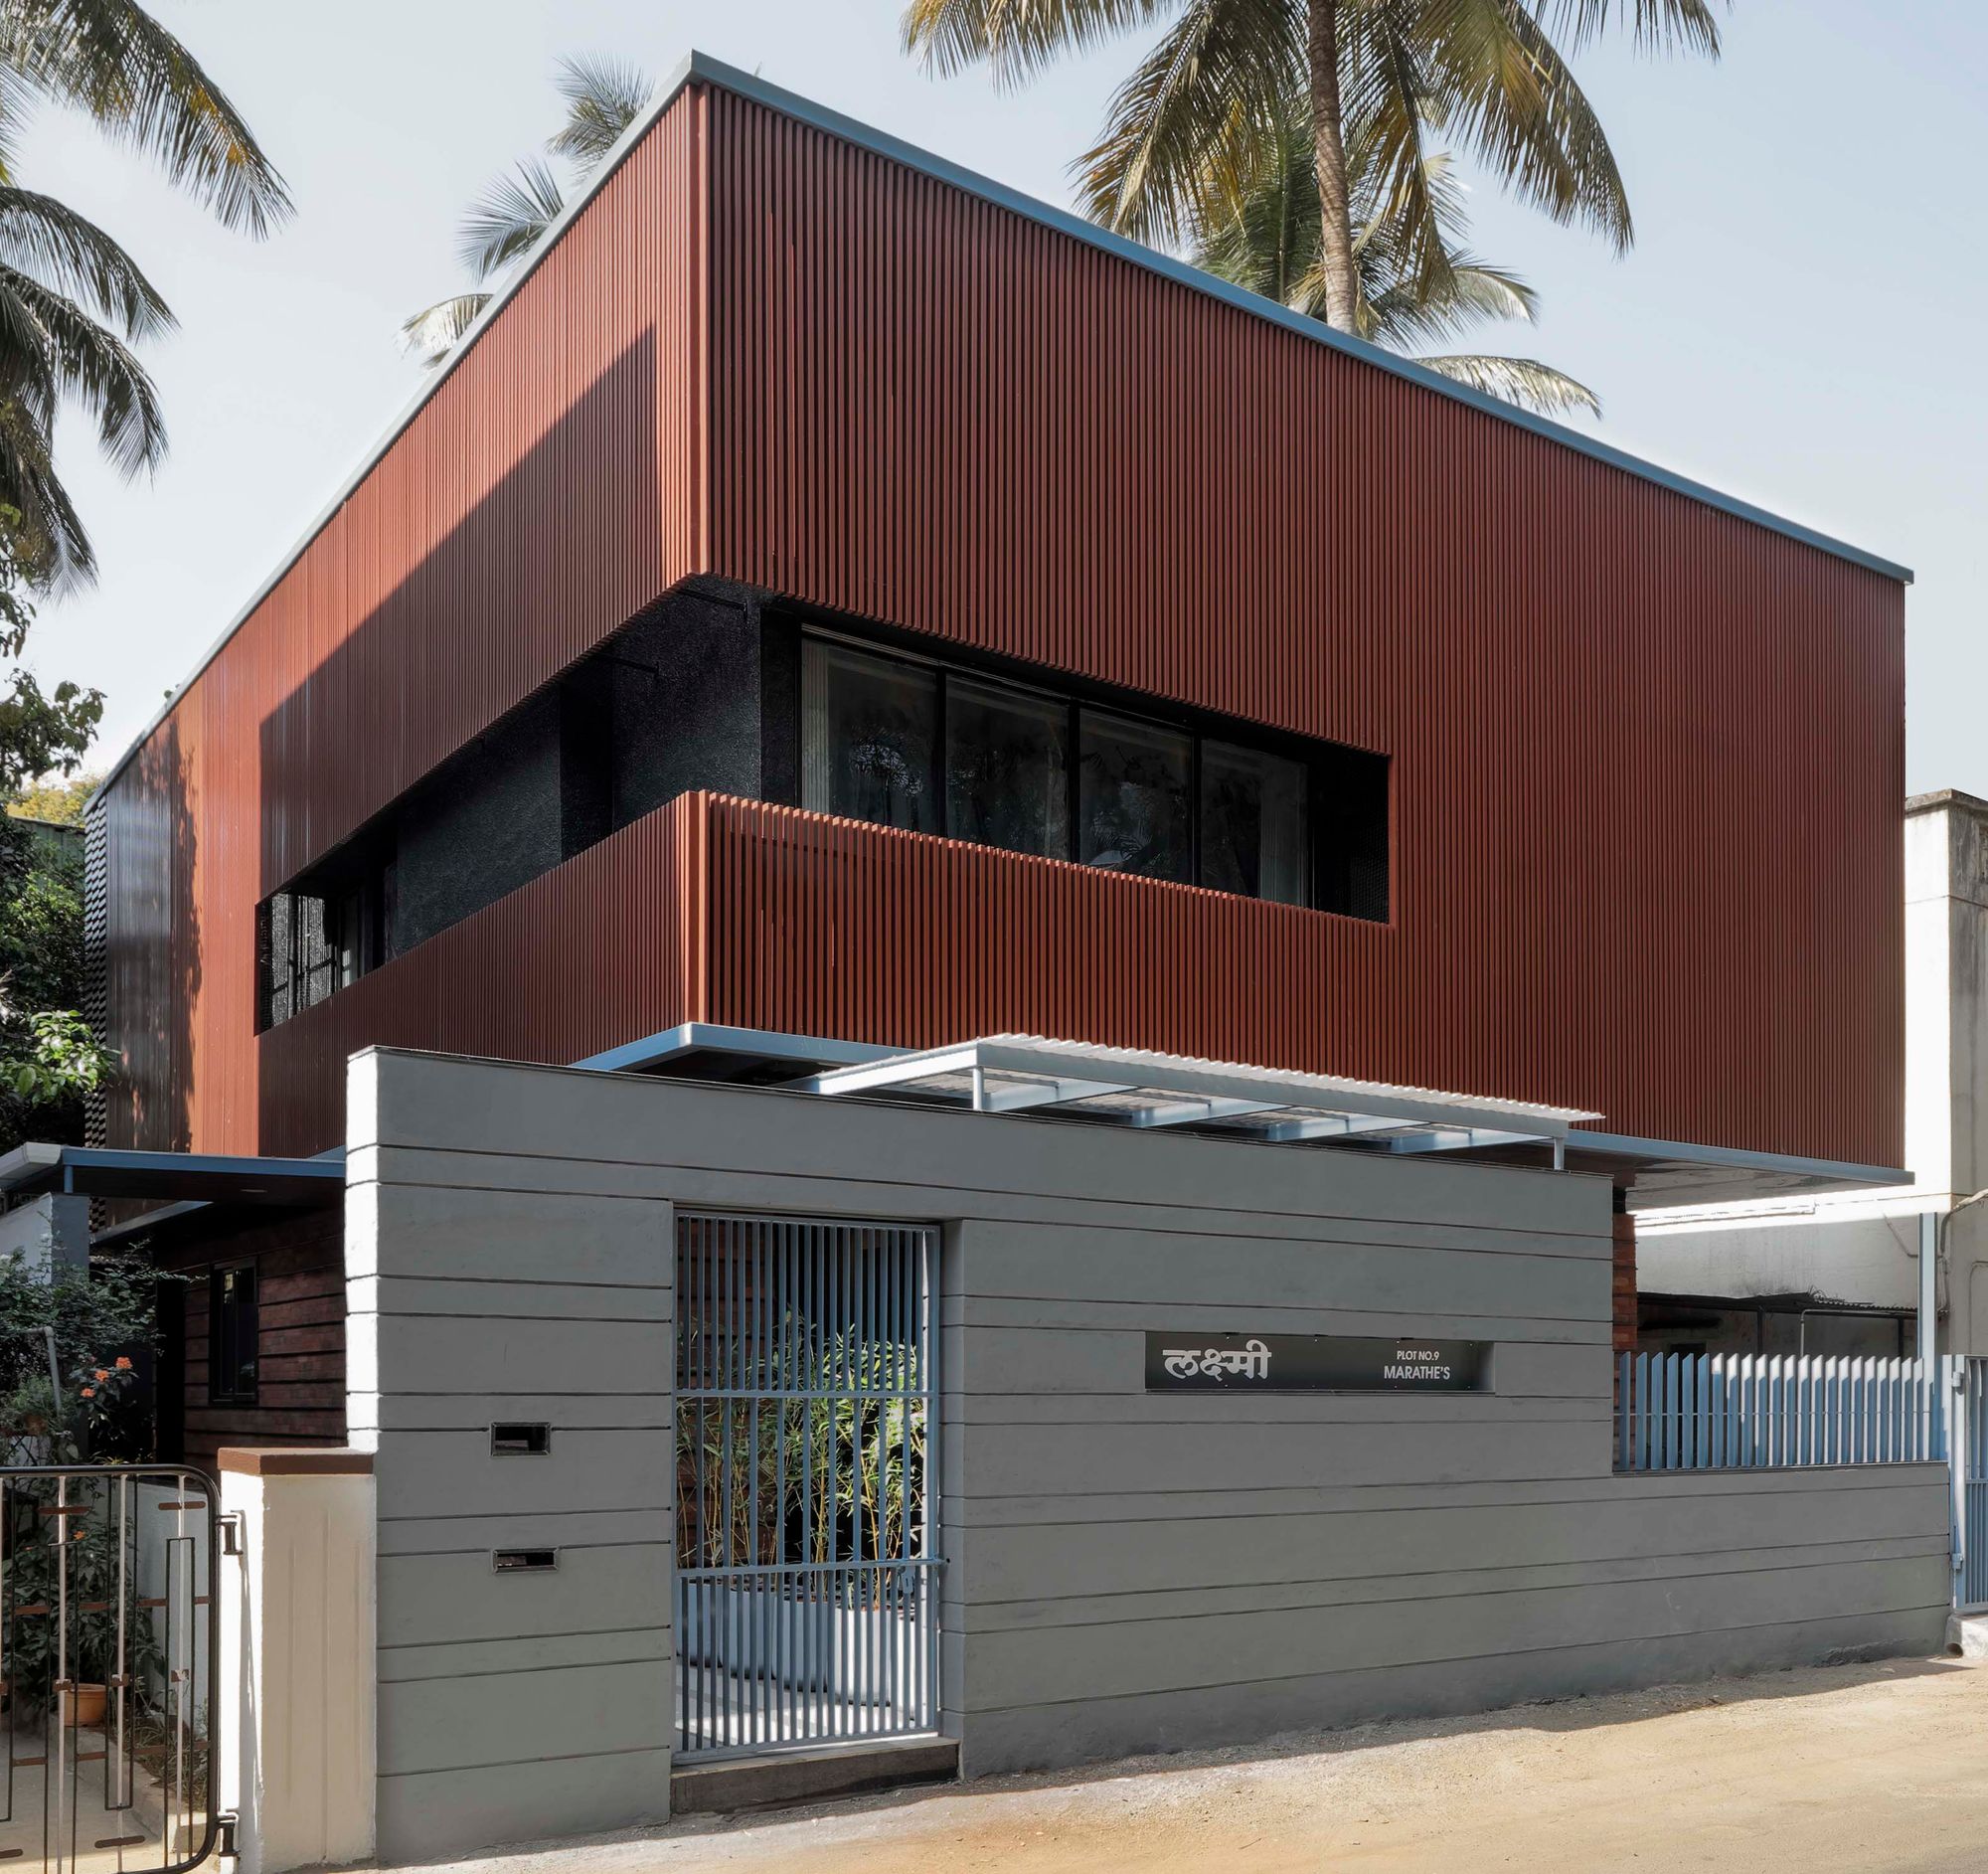 Architect designs a modern Brown Envelope around a compact heritage bungalow